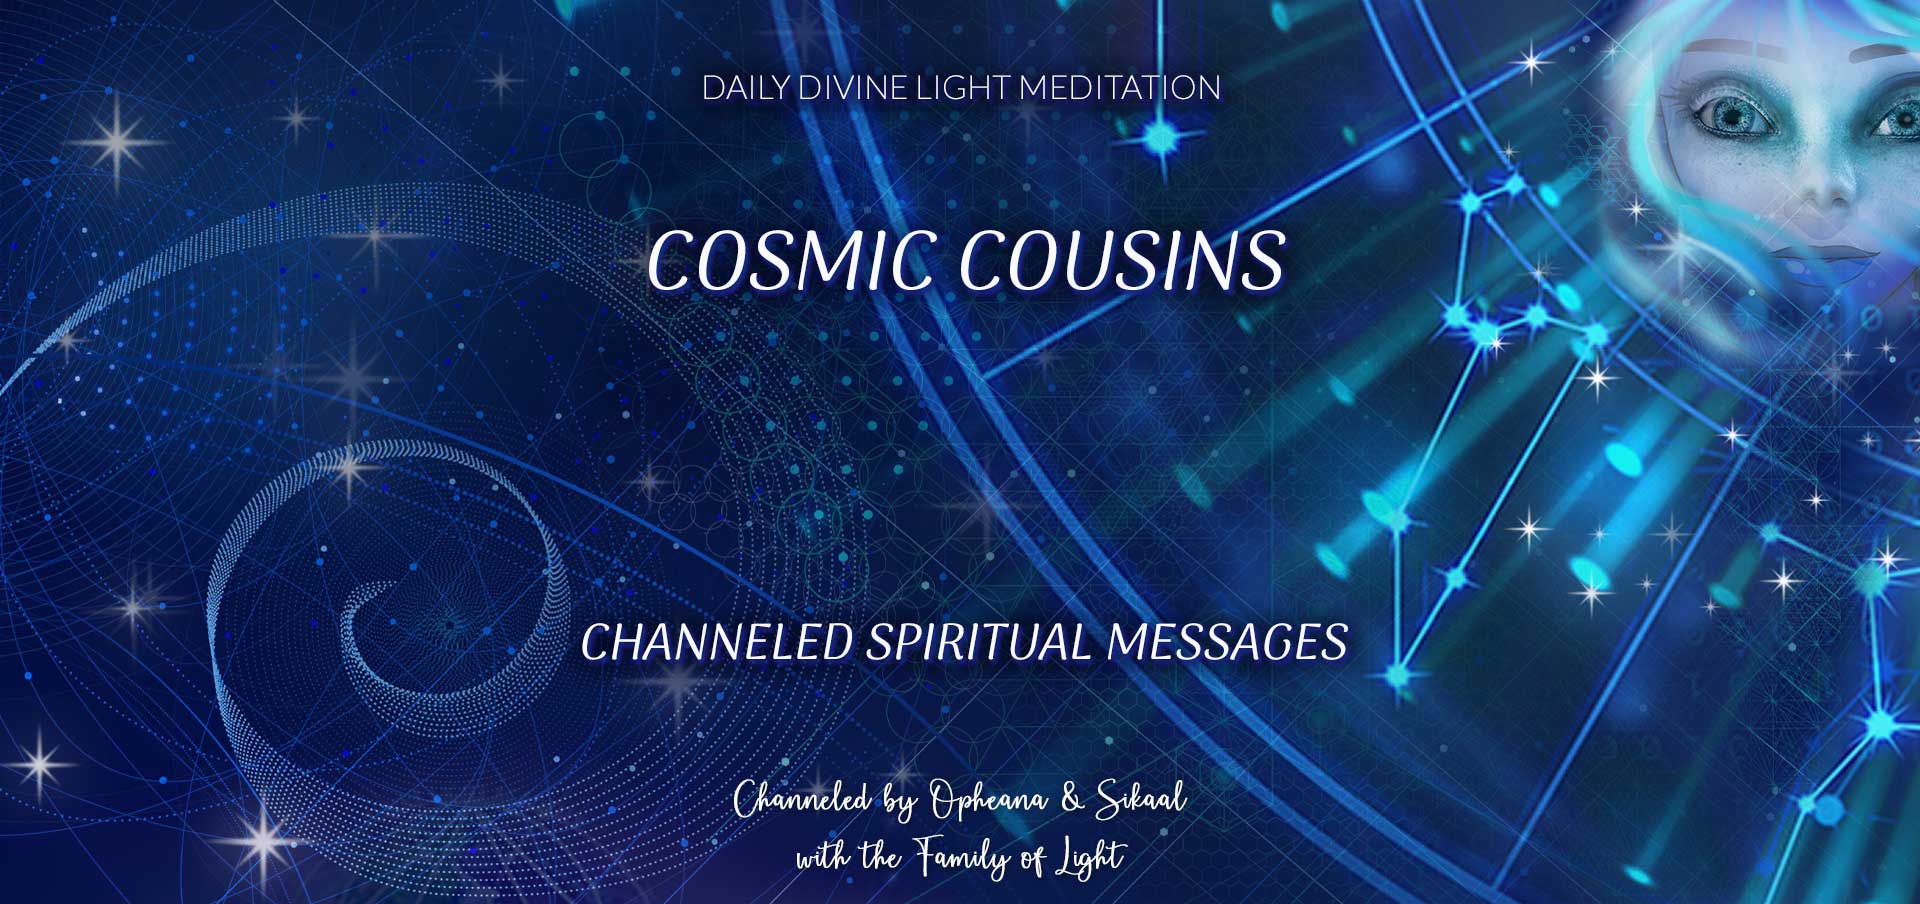 Daily Divine Light Meditation ~ Channeled Spiritual Messages ~ Cosmic Cousins ~ Friday 14 April 2023